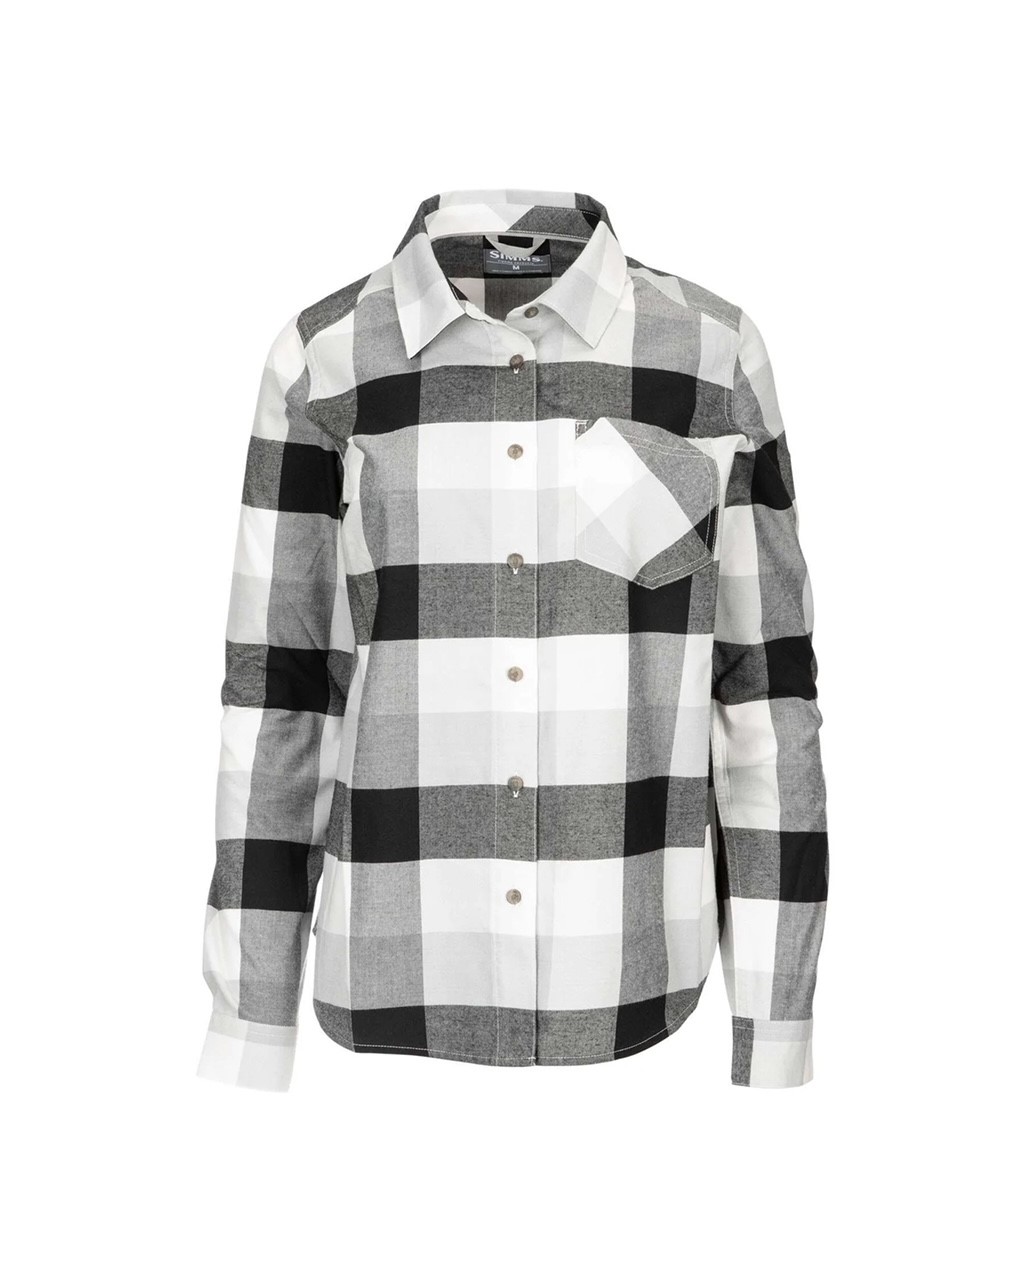 Simms W's Sunset Flannel - Grey Heather Buffalo Plaid - Extra Small